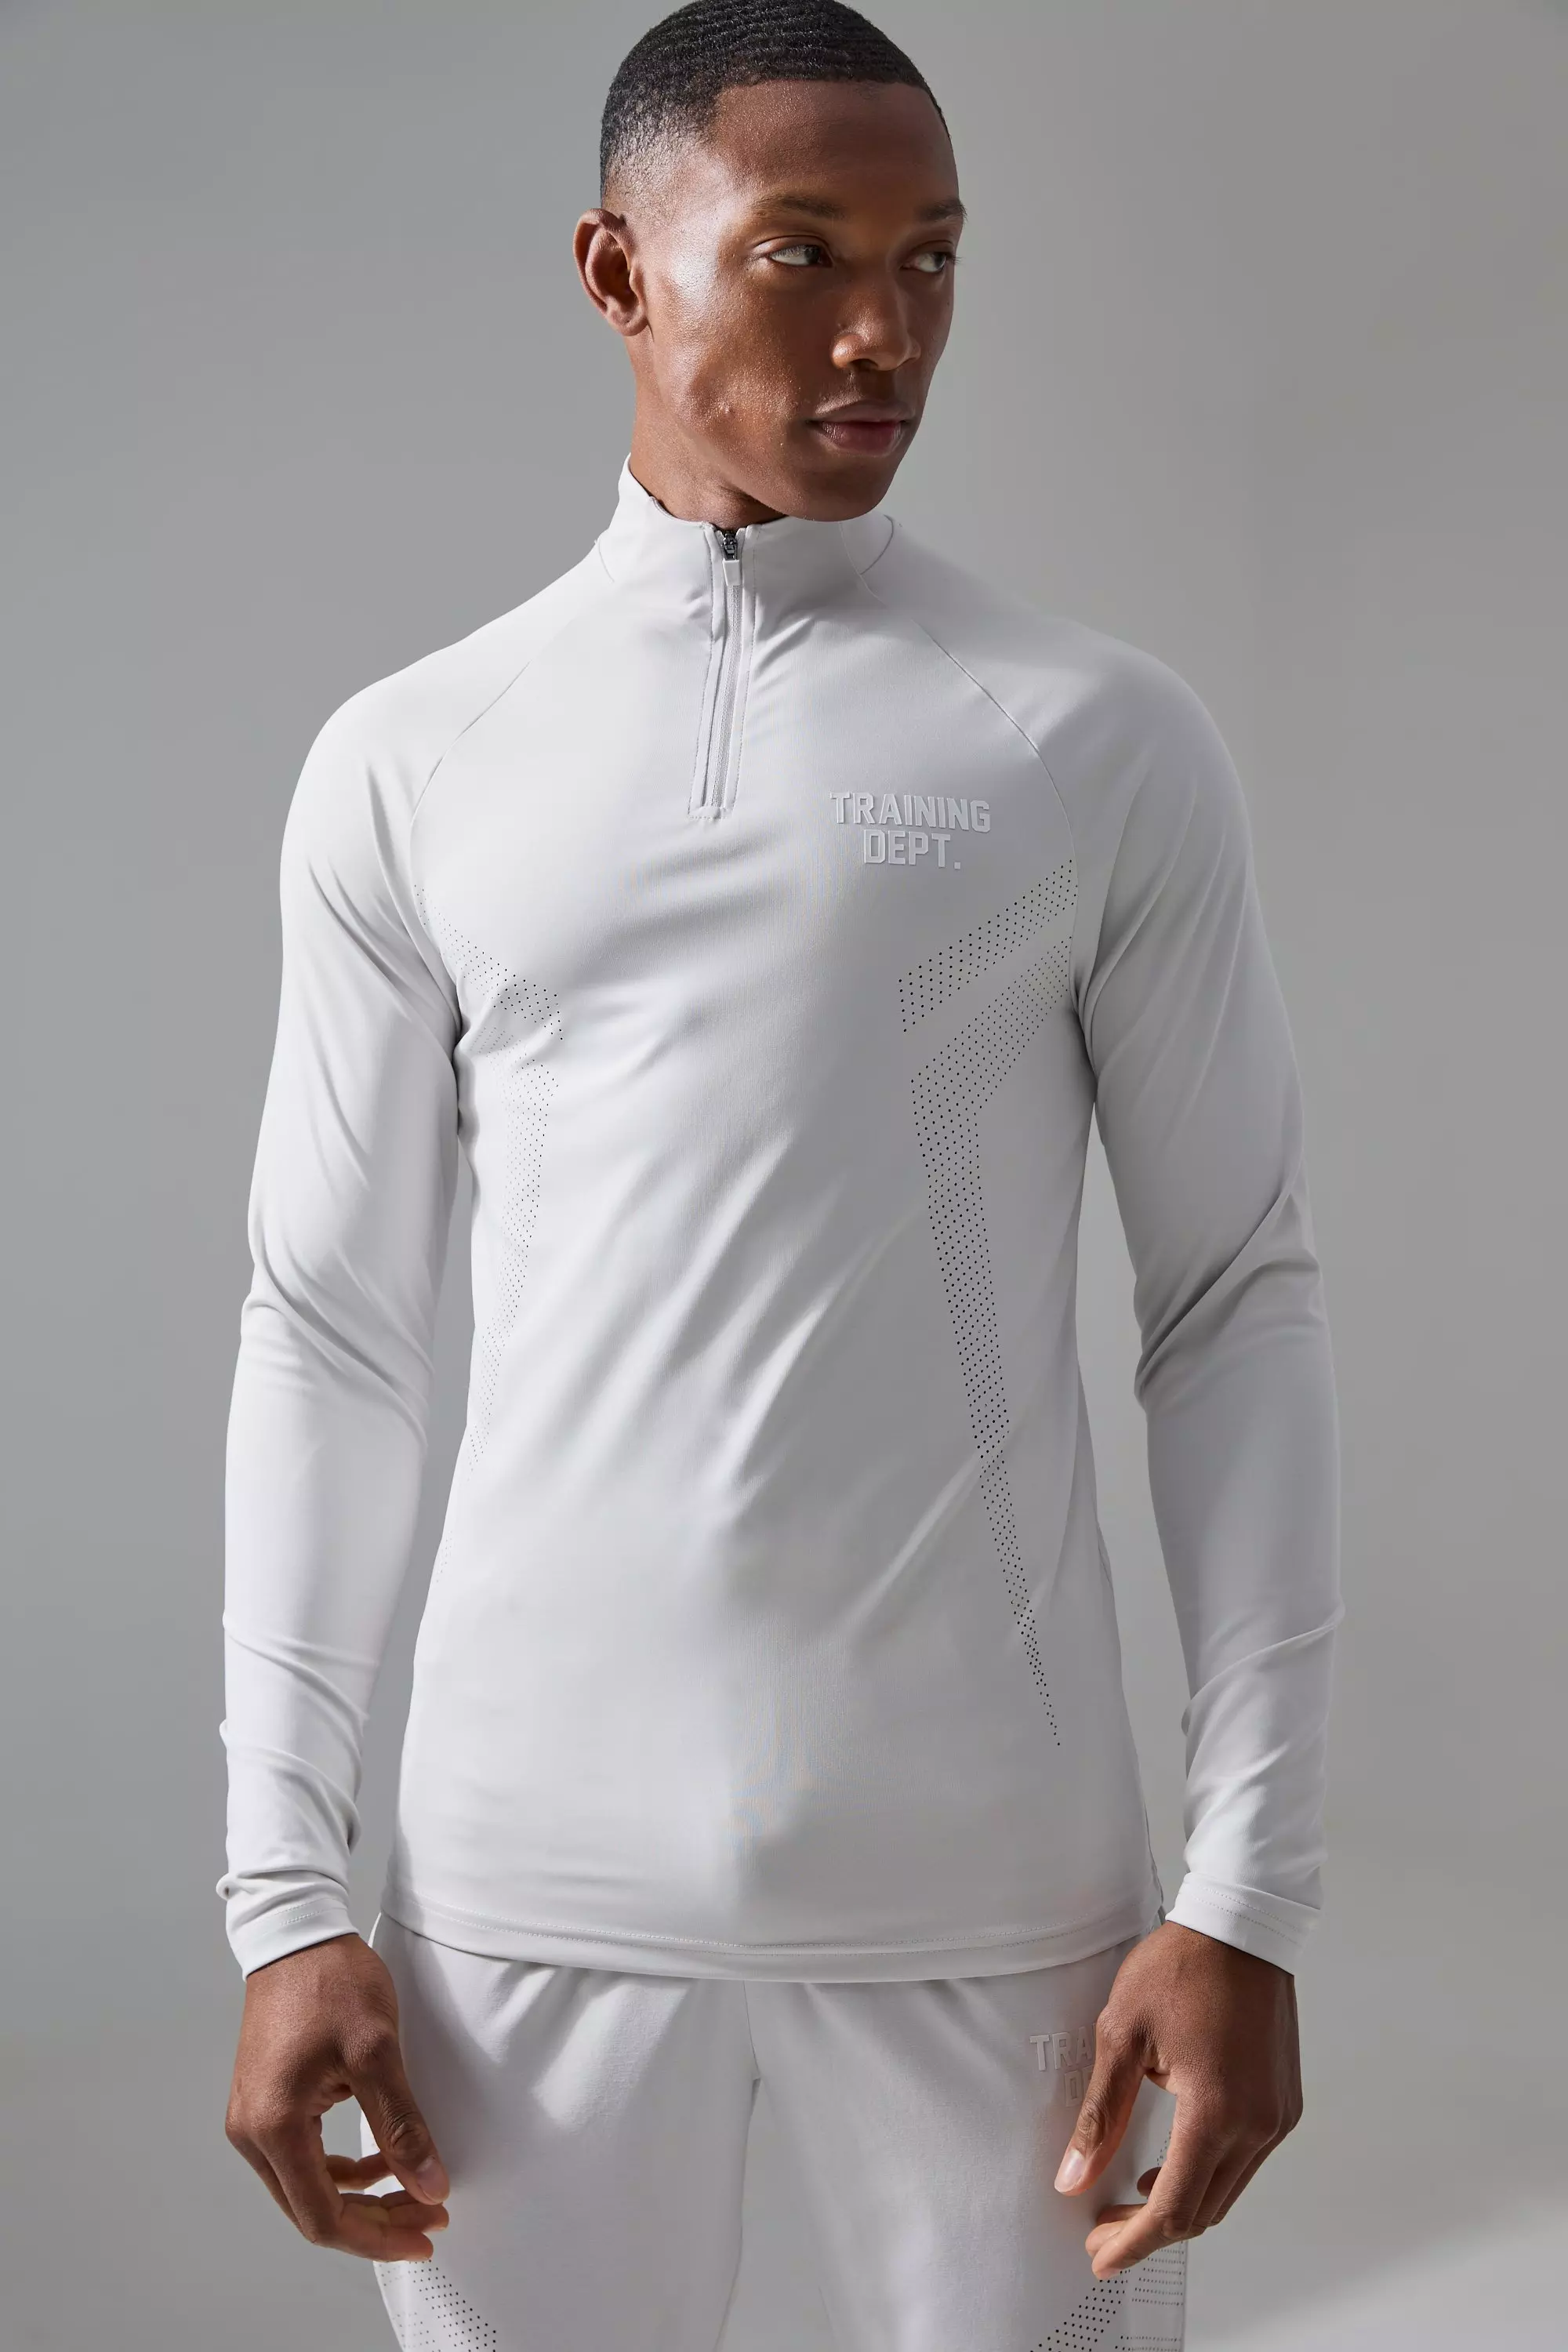 Active Training Dept Muscle Fit Perforated Quarter Zip Top Light grey